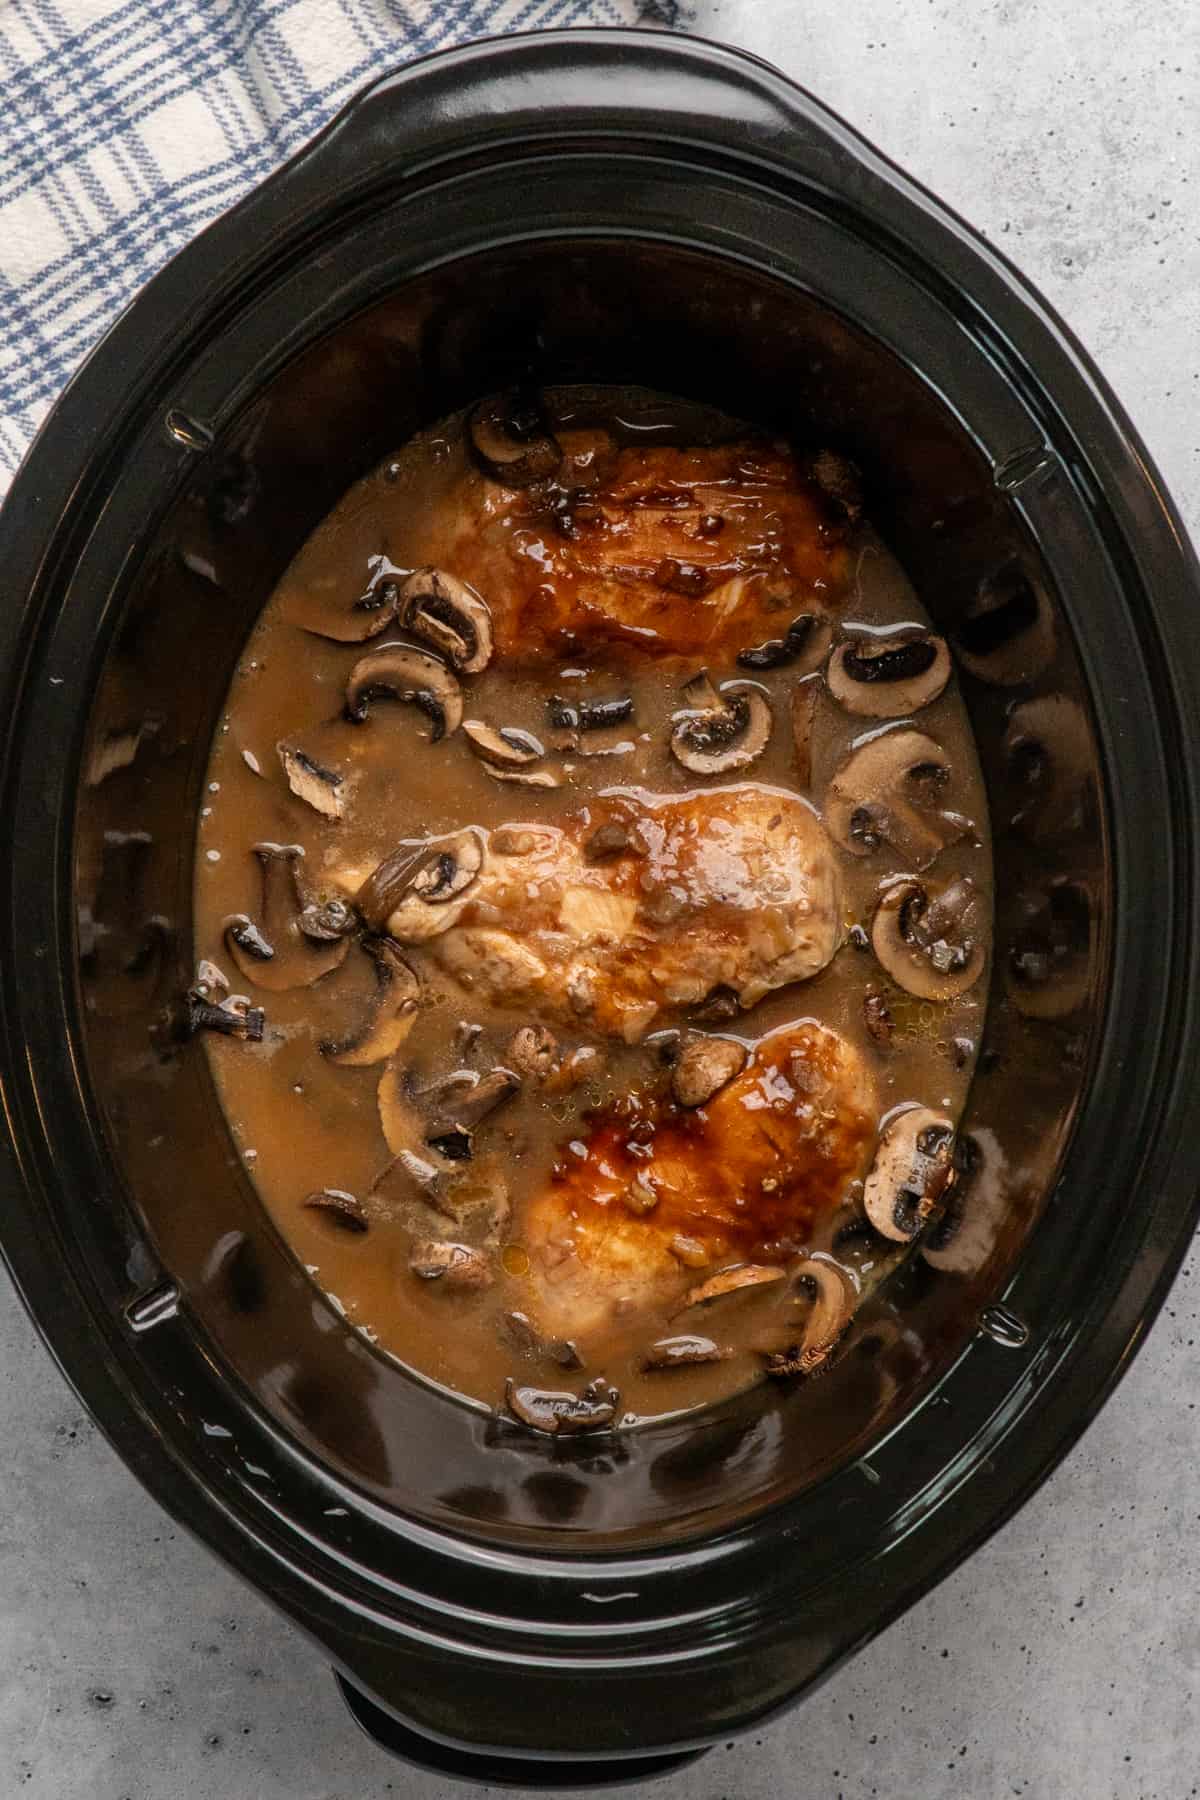 Cook mushrooms and chicken in a slow cooker.